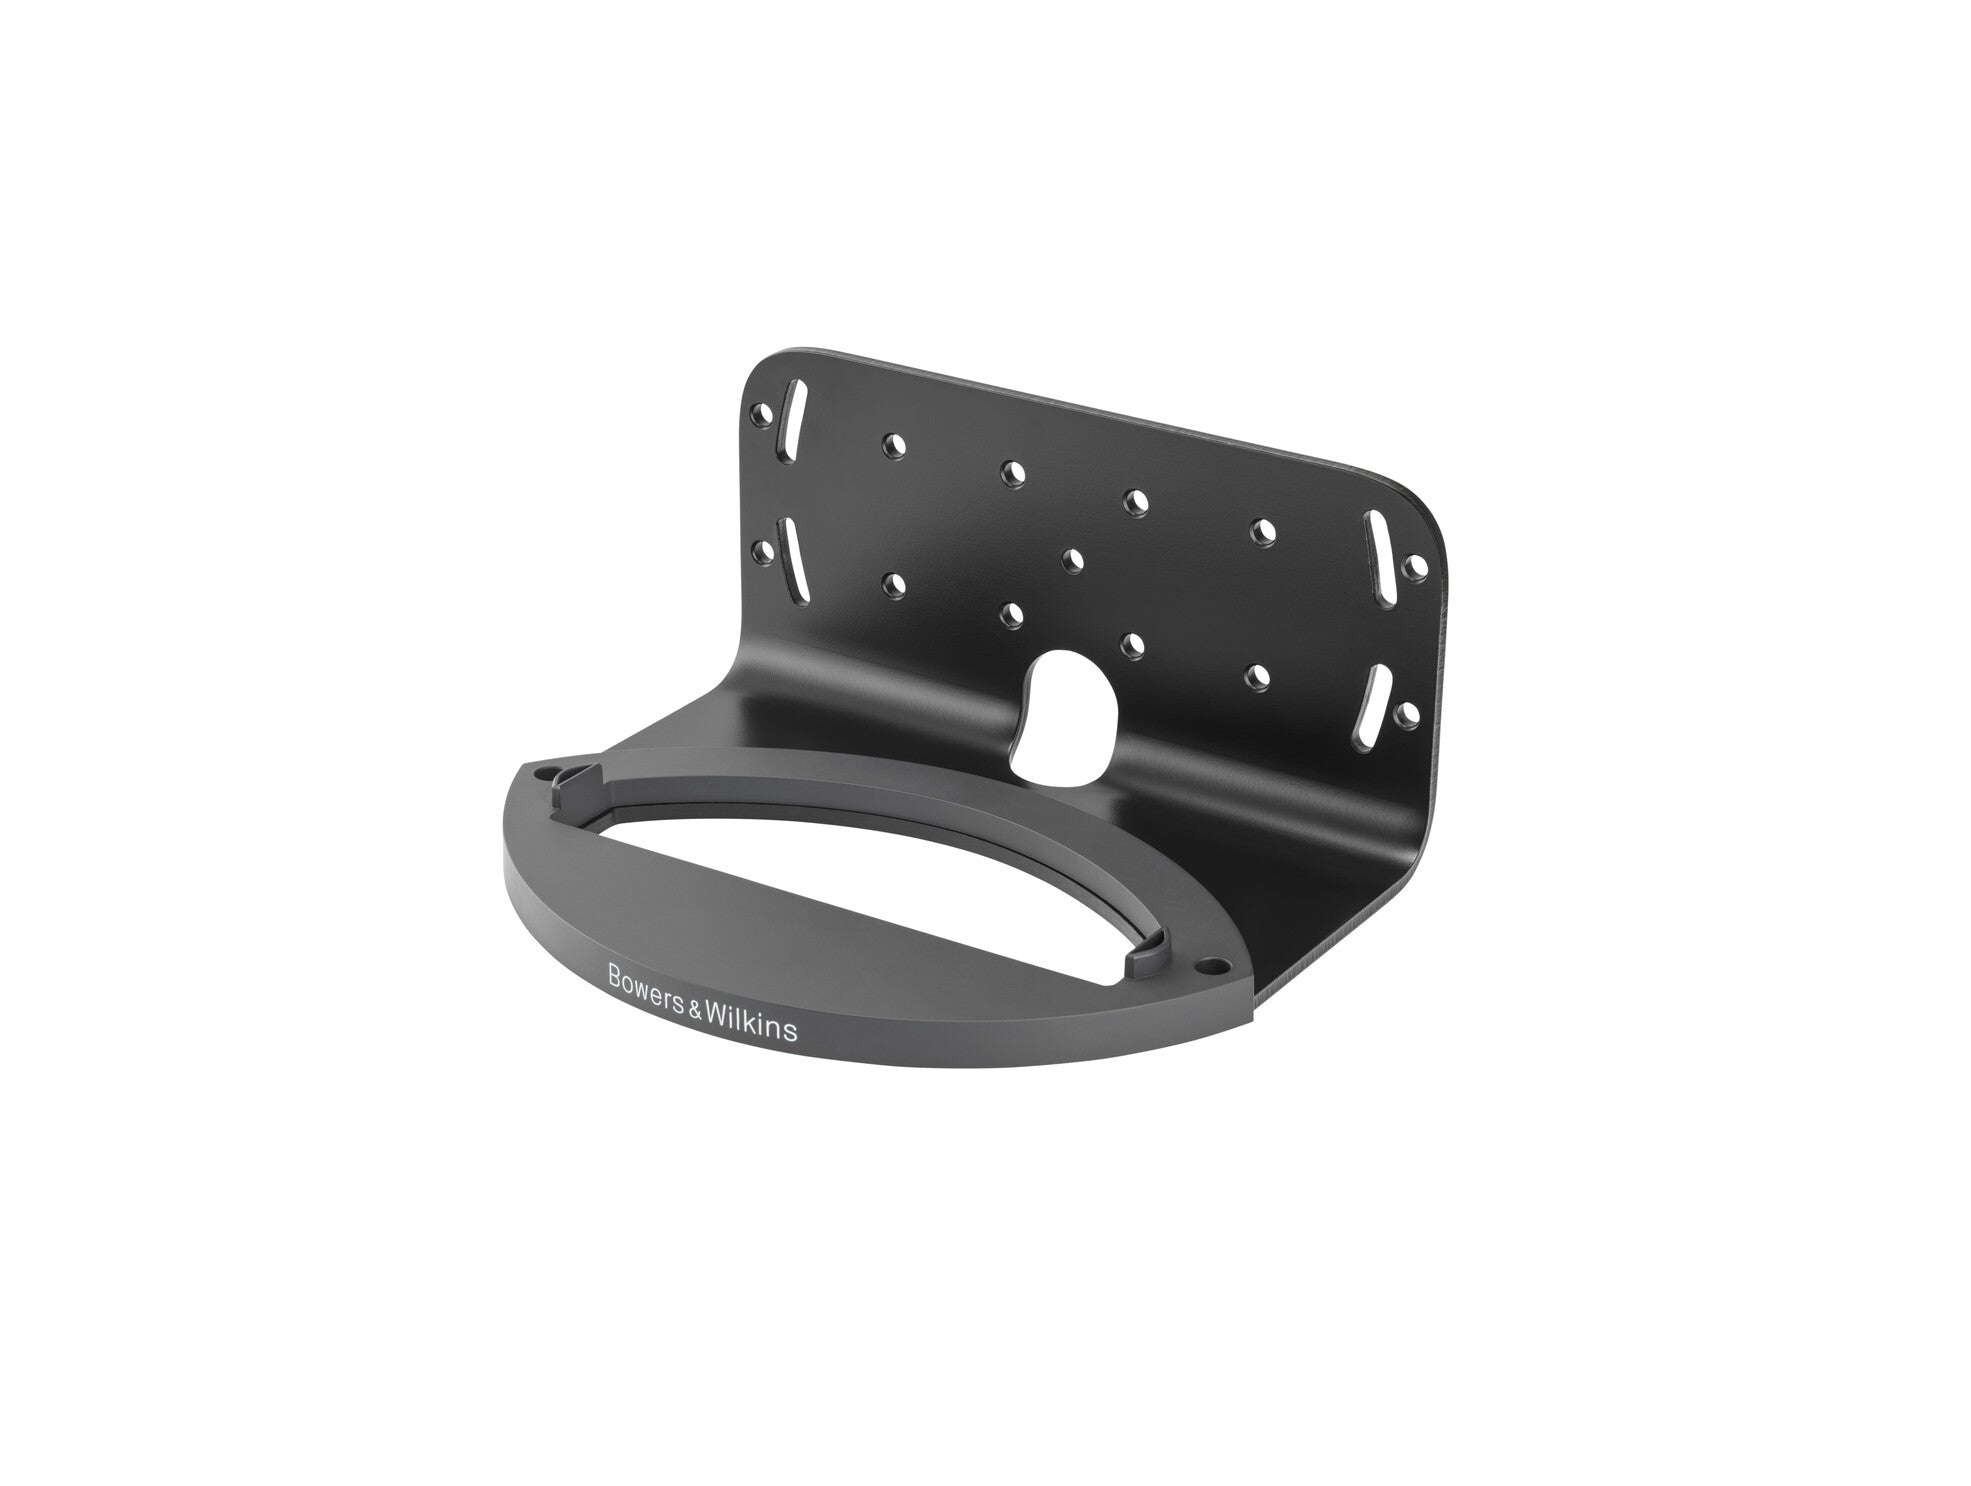 Bowers & Wilkins Formations Wedge - Wall Bracket